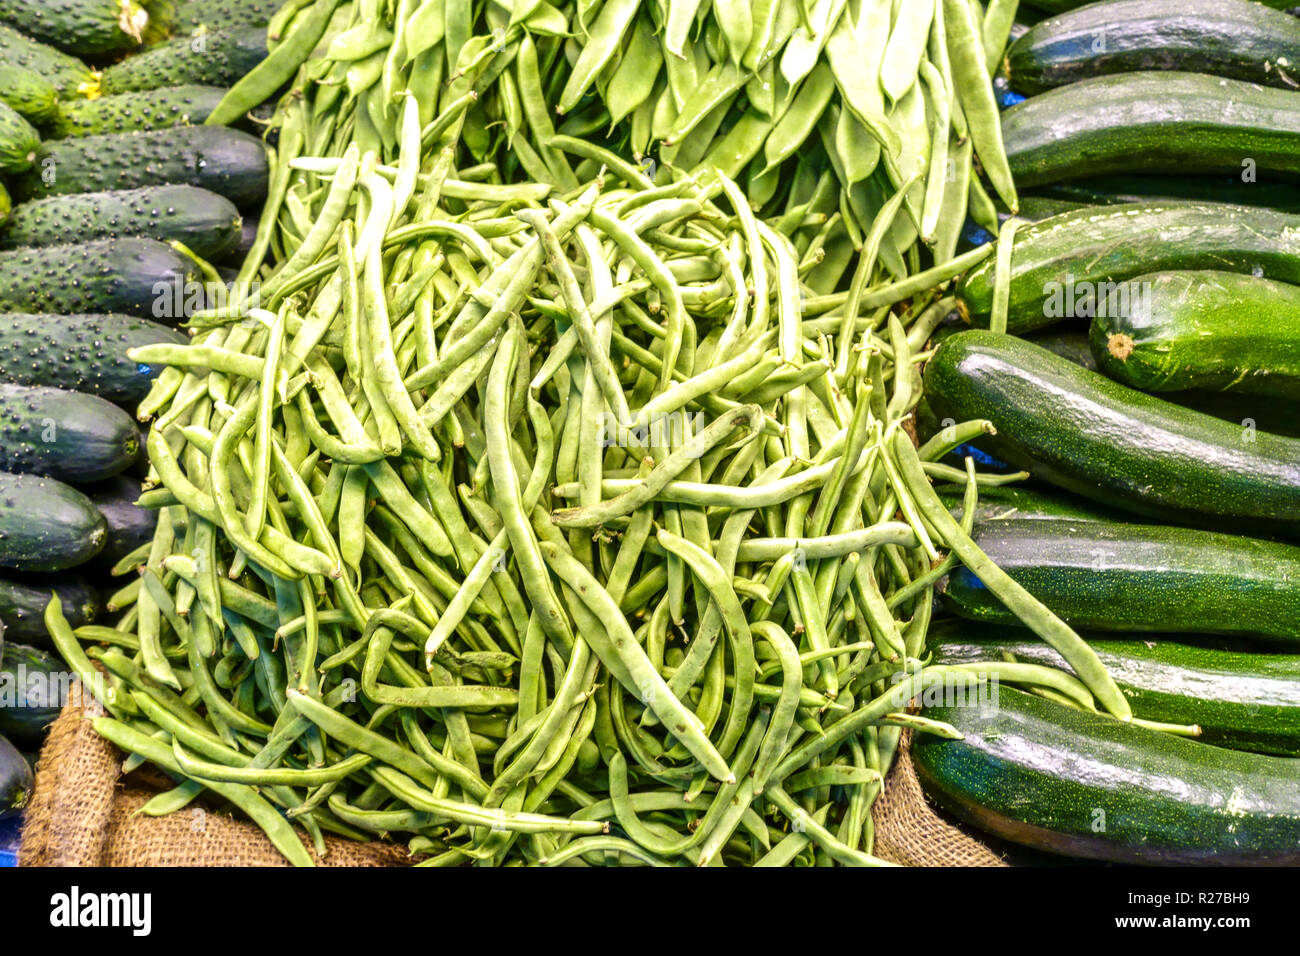 Fresh pea pods on a vegetable market stall, Alicante Spain Stock Photo